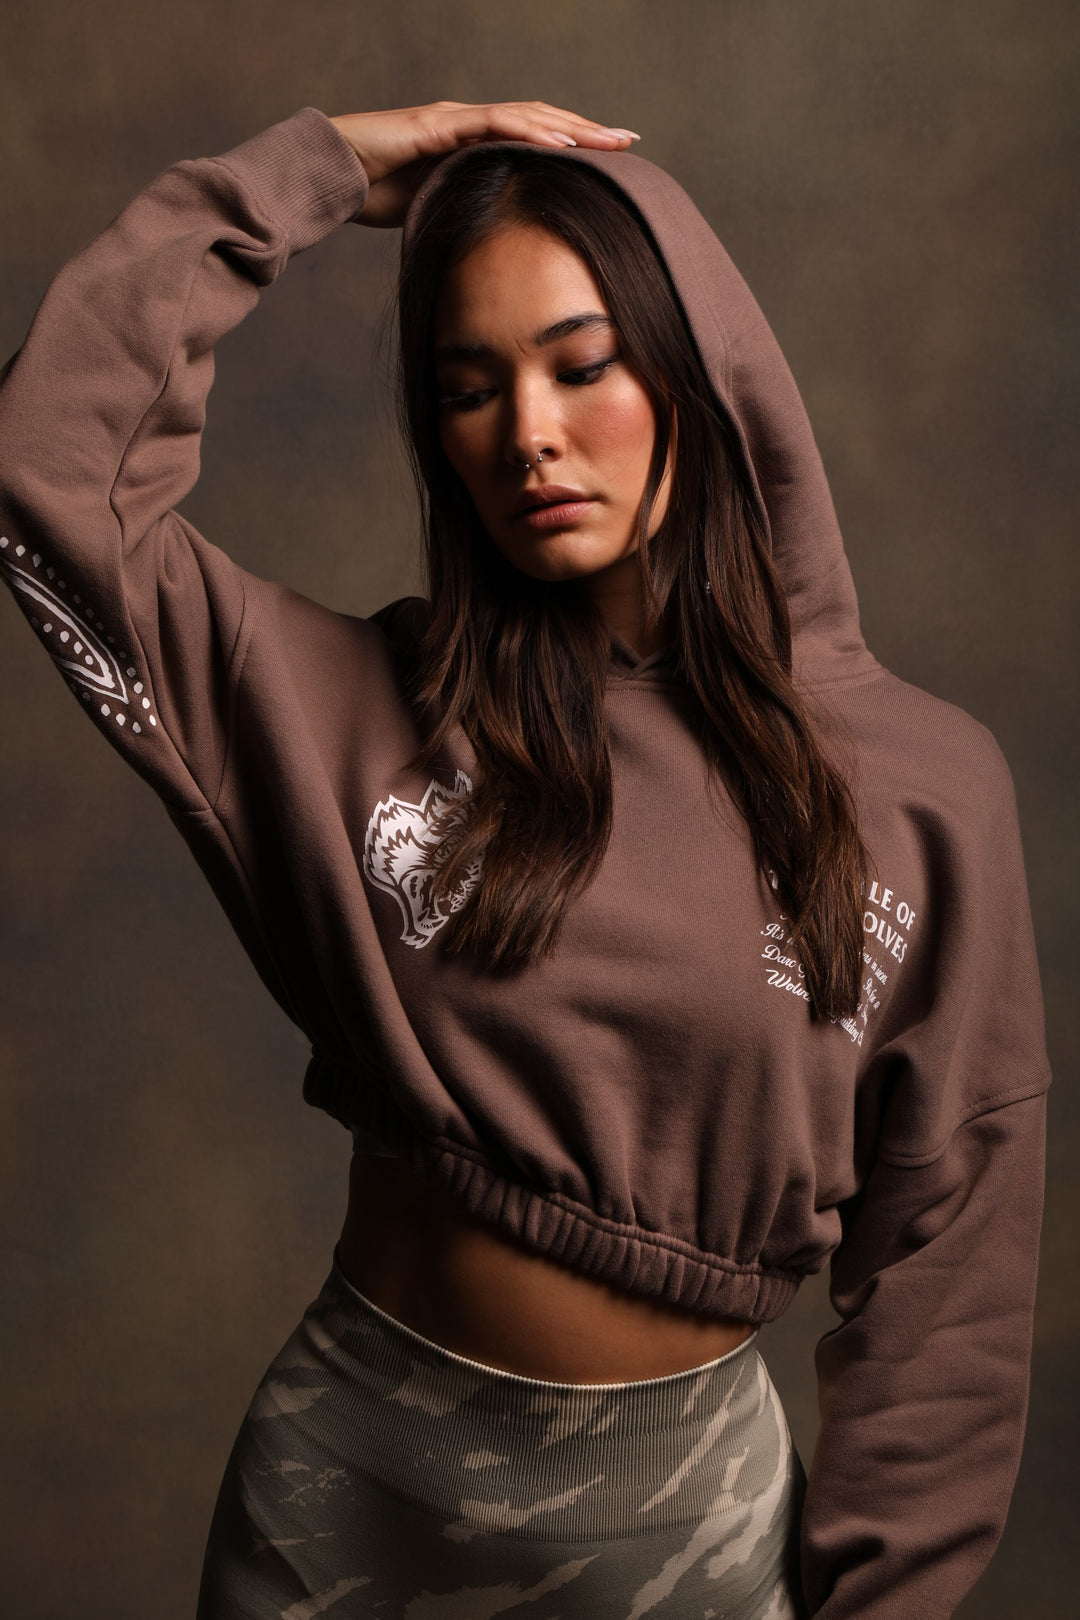 Southwest Paisley "McCauley" (Cropped) Hoodie in Mojave Brown